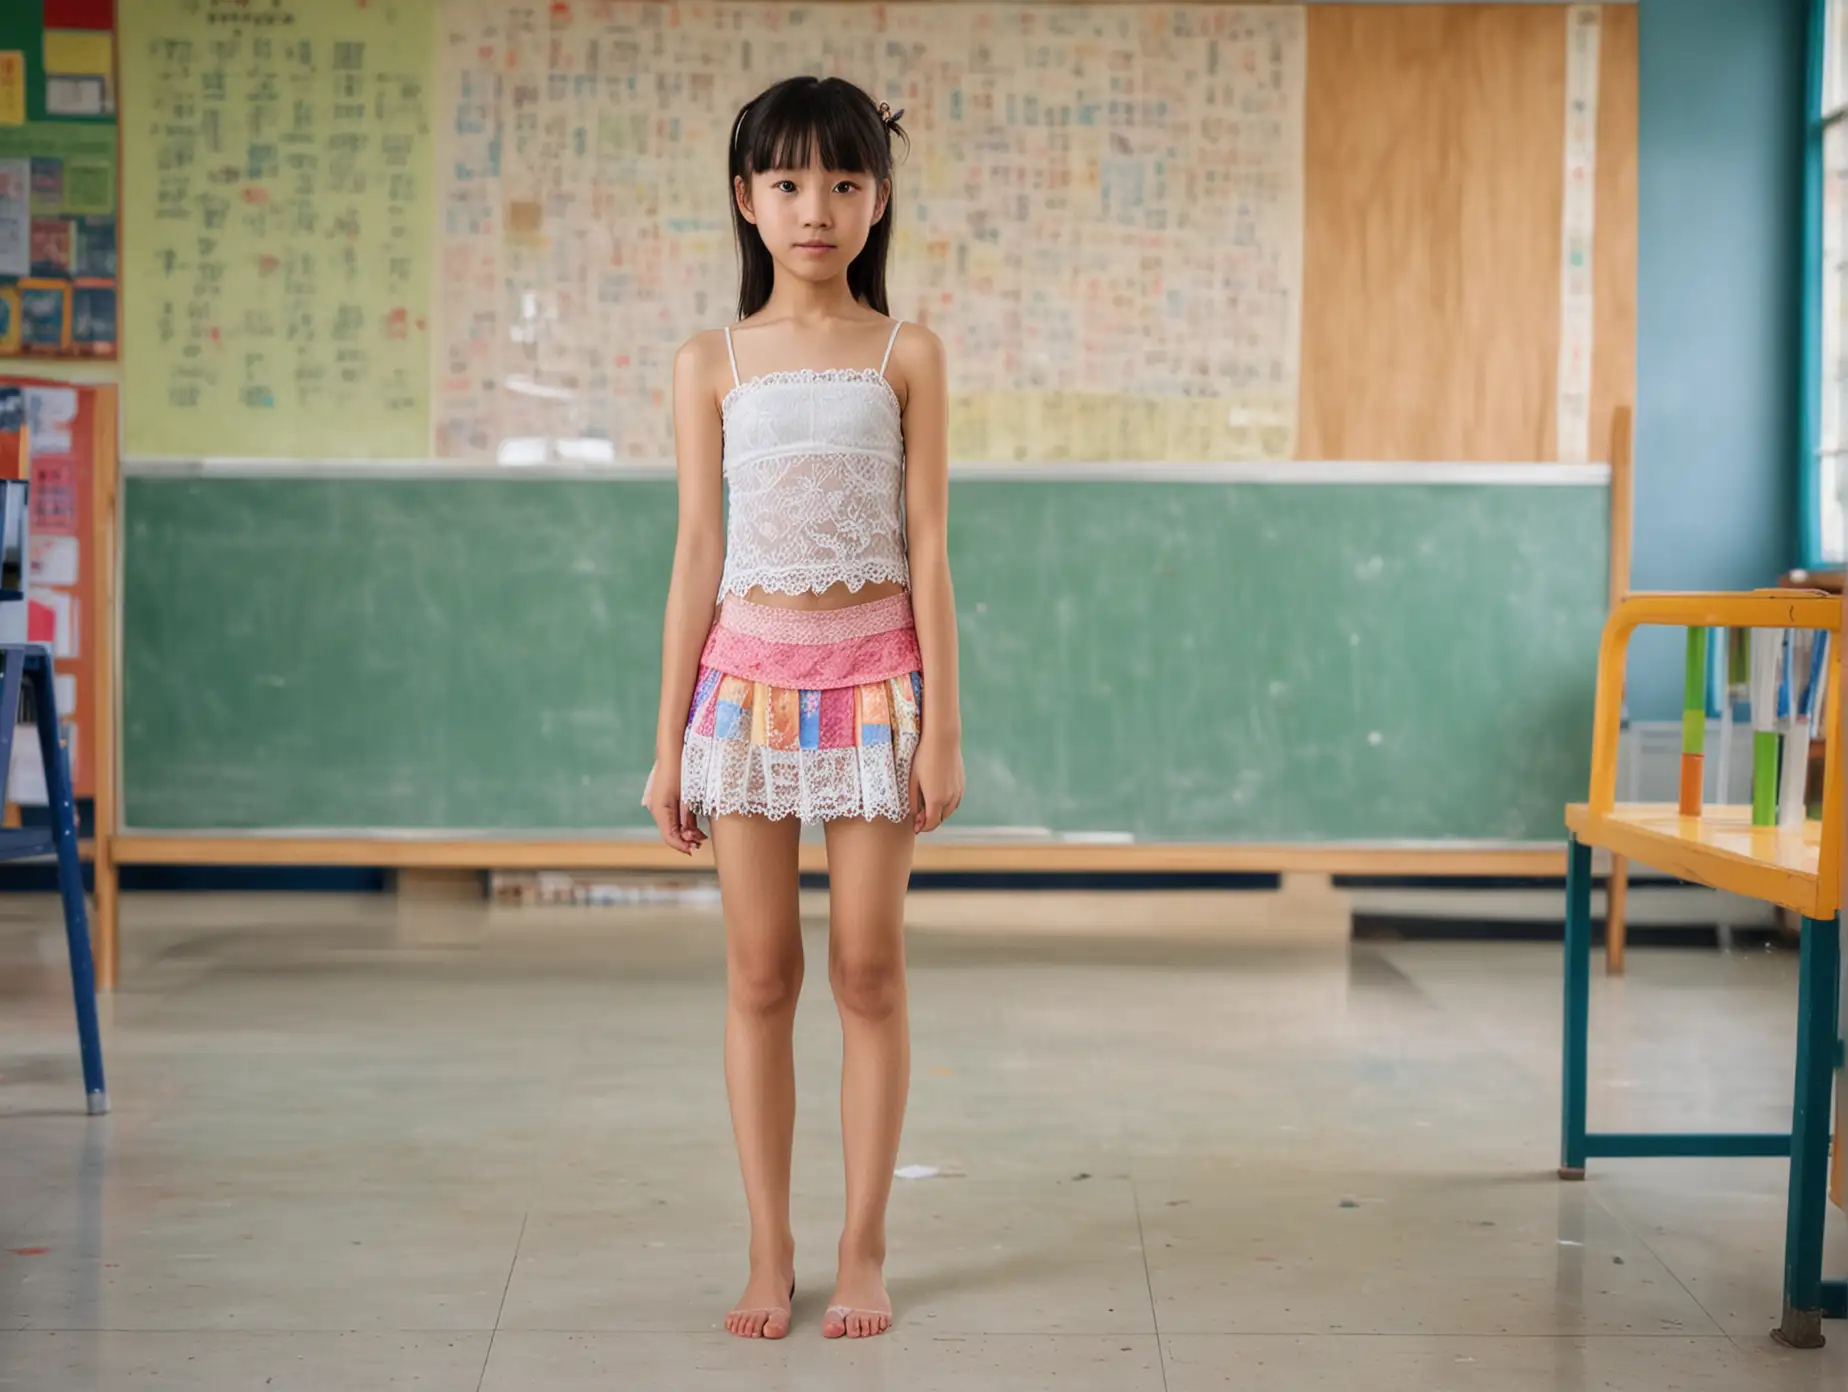 Adorable-Chinese-Girl-in-Colorful-School-Outfit